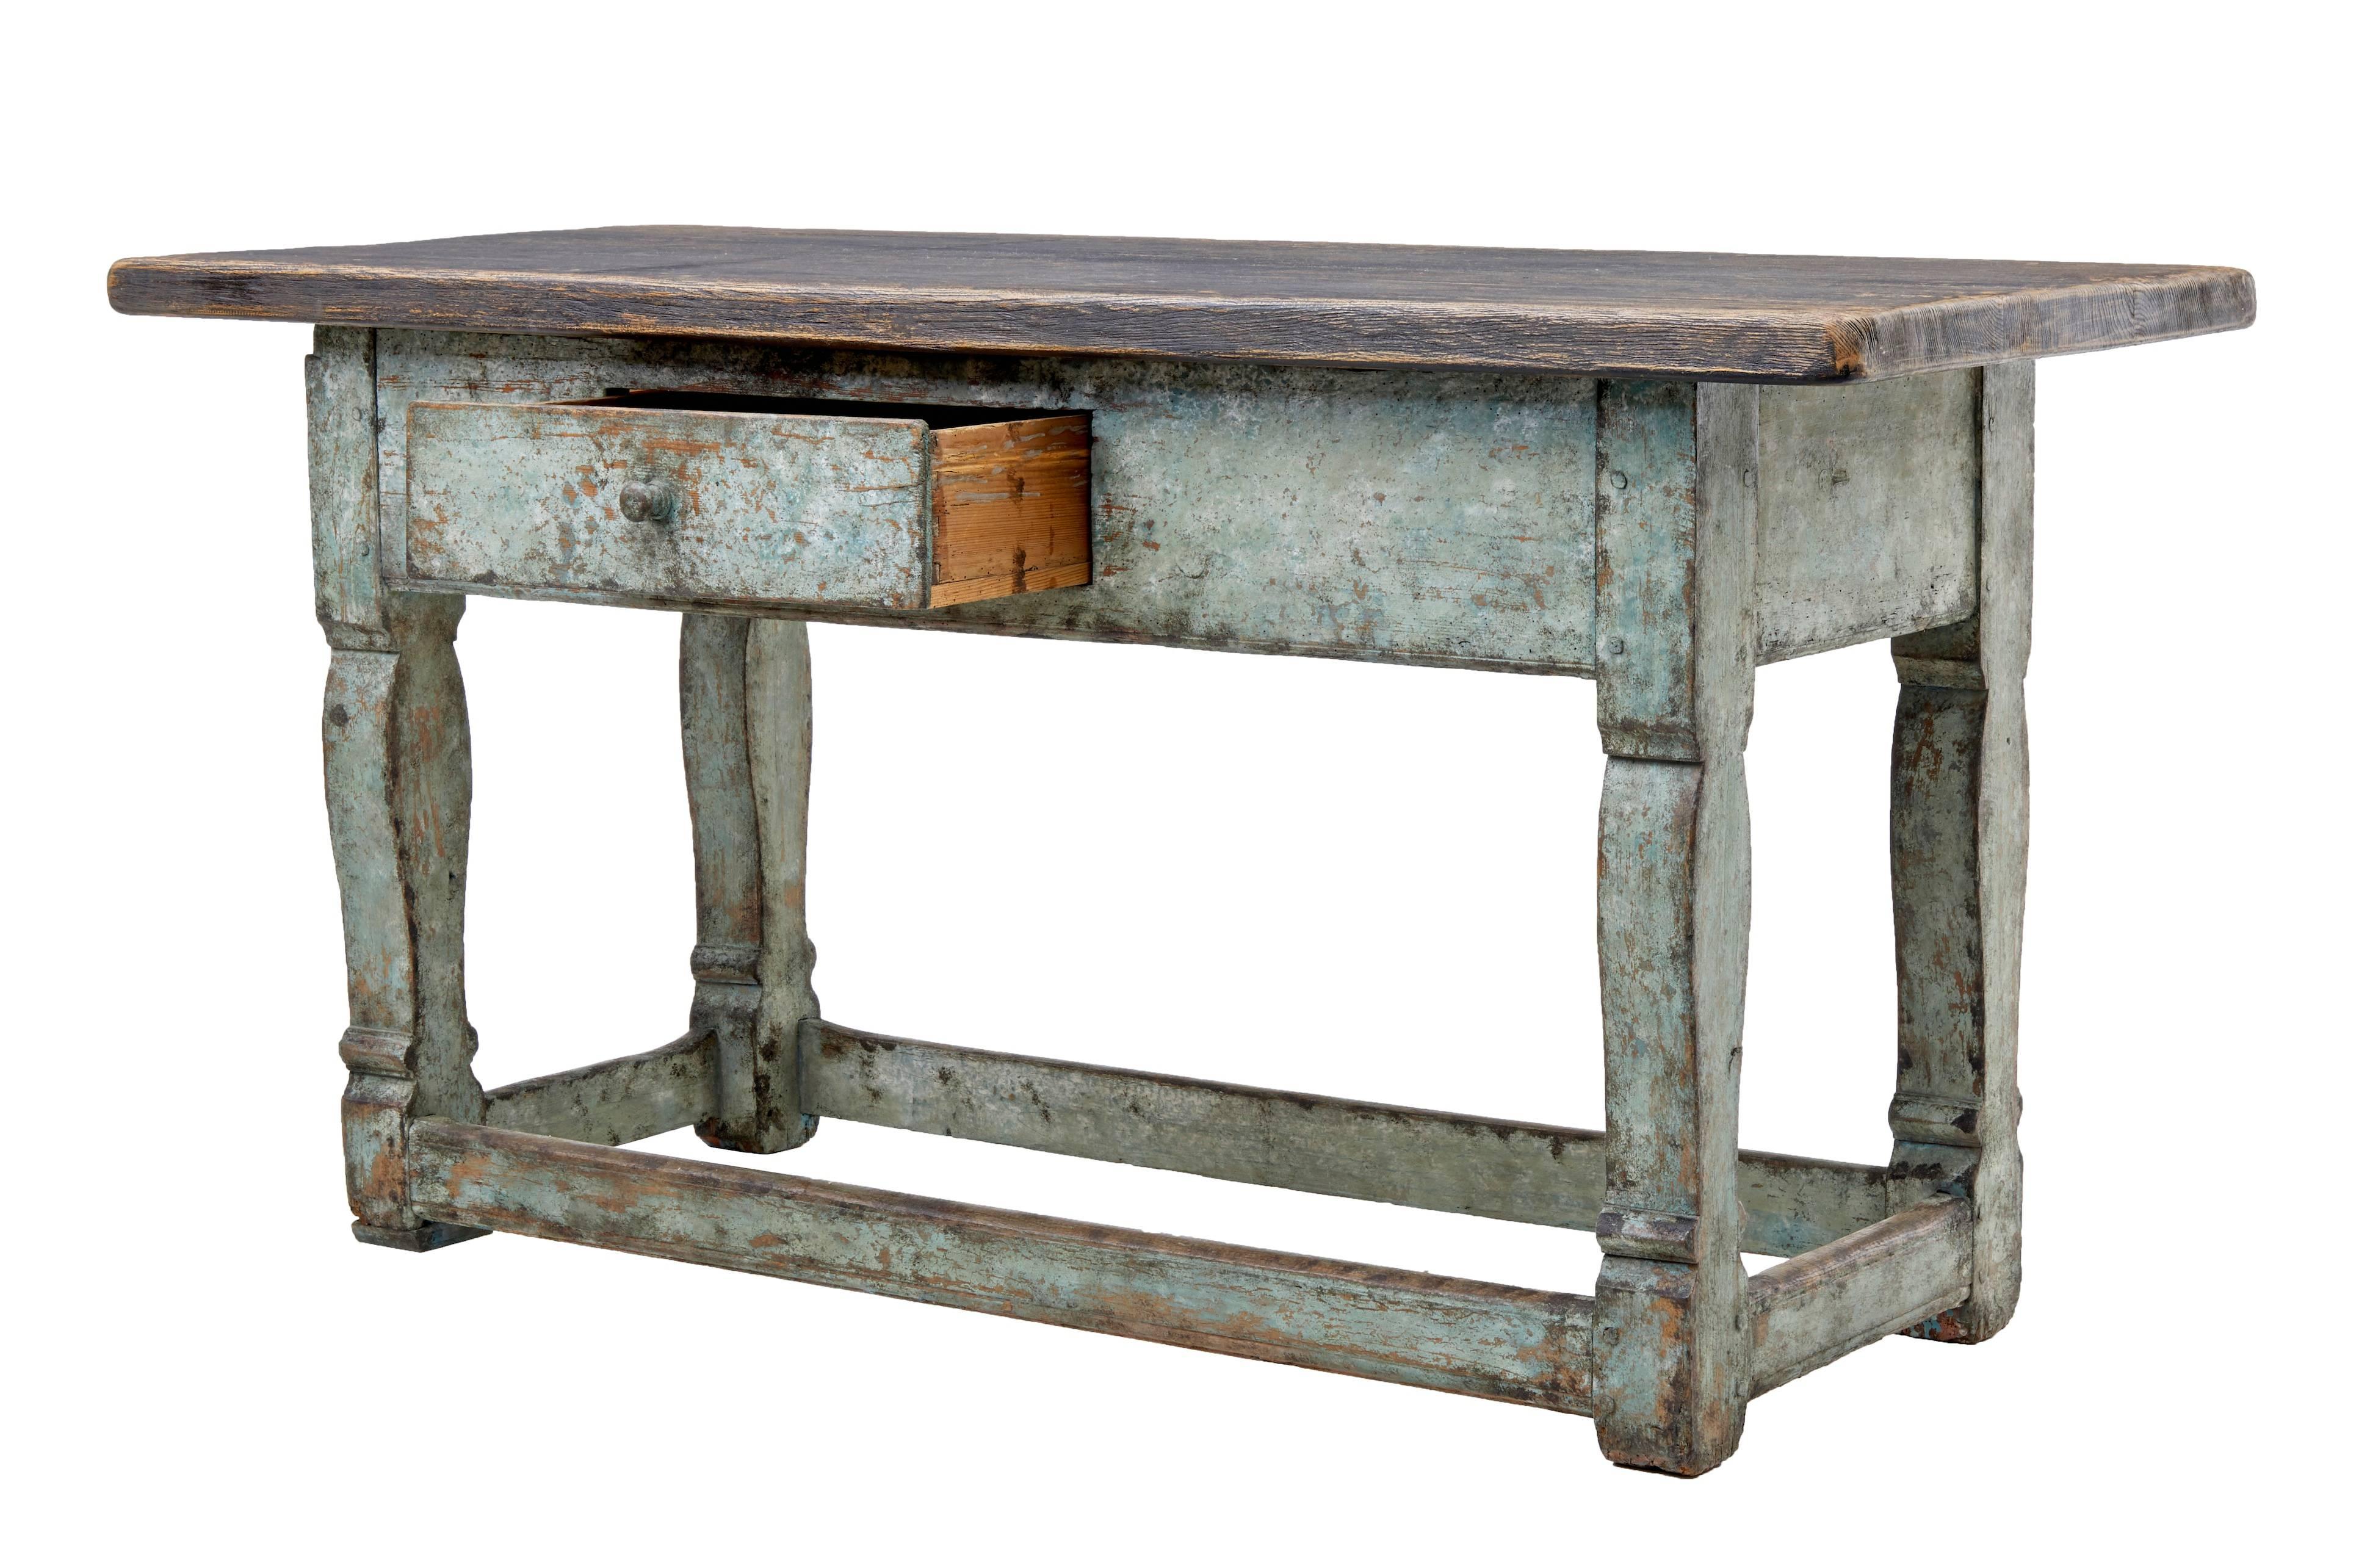 Rustic 19th Century Painted Swedish Pine Kitchen Table